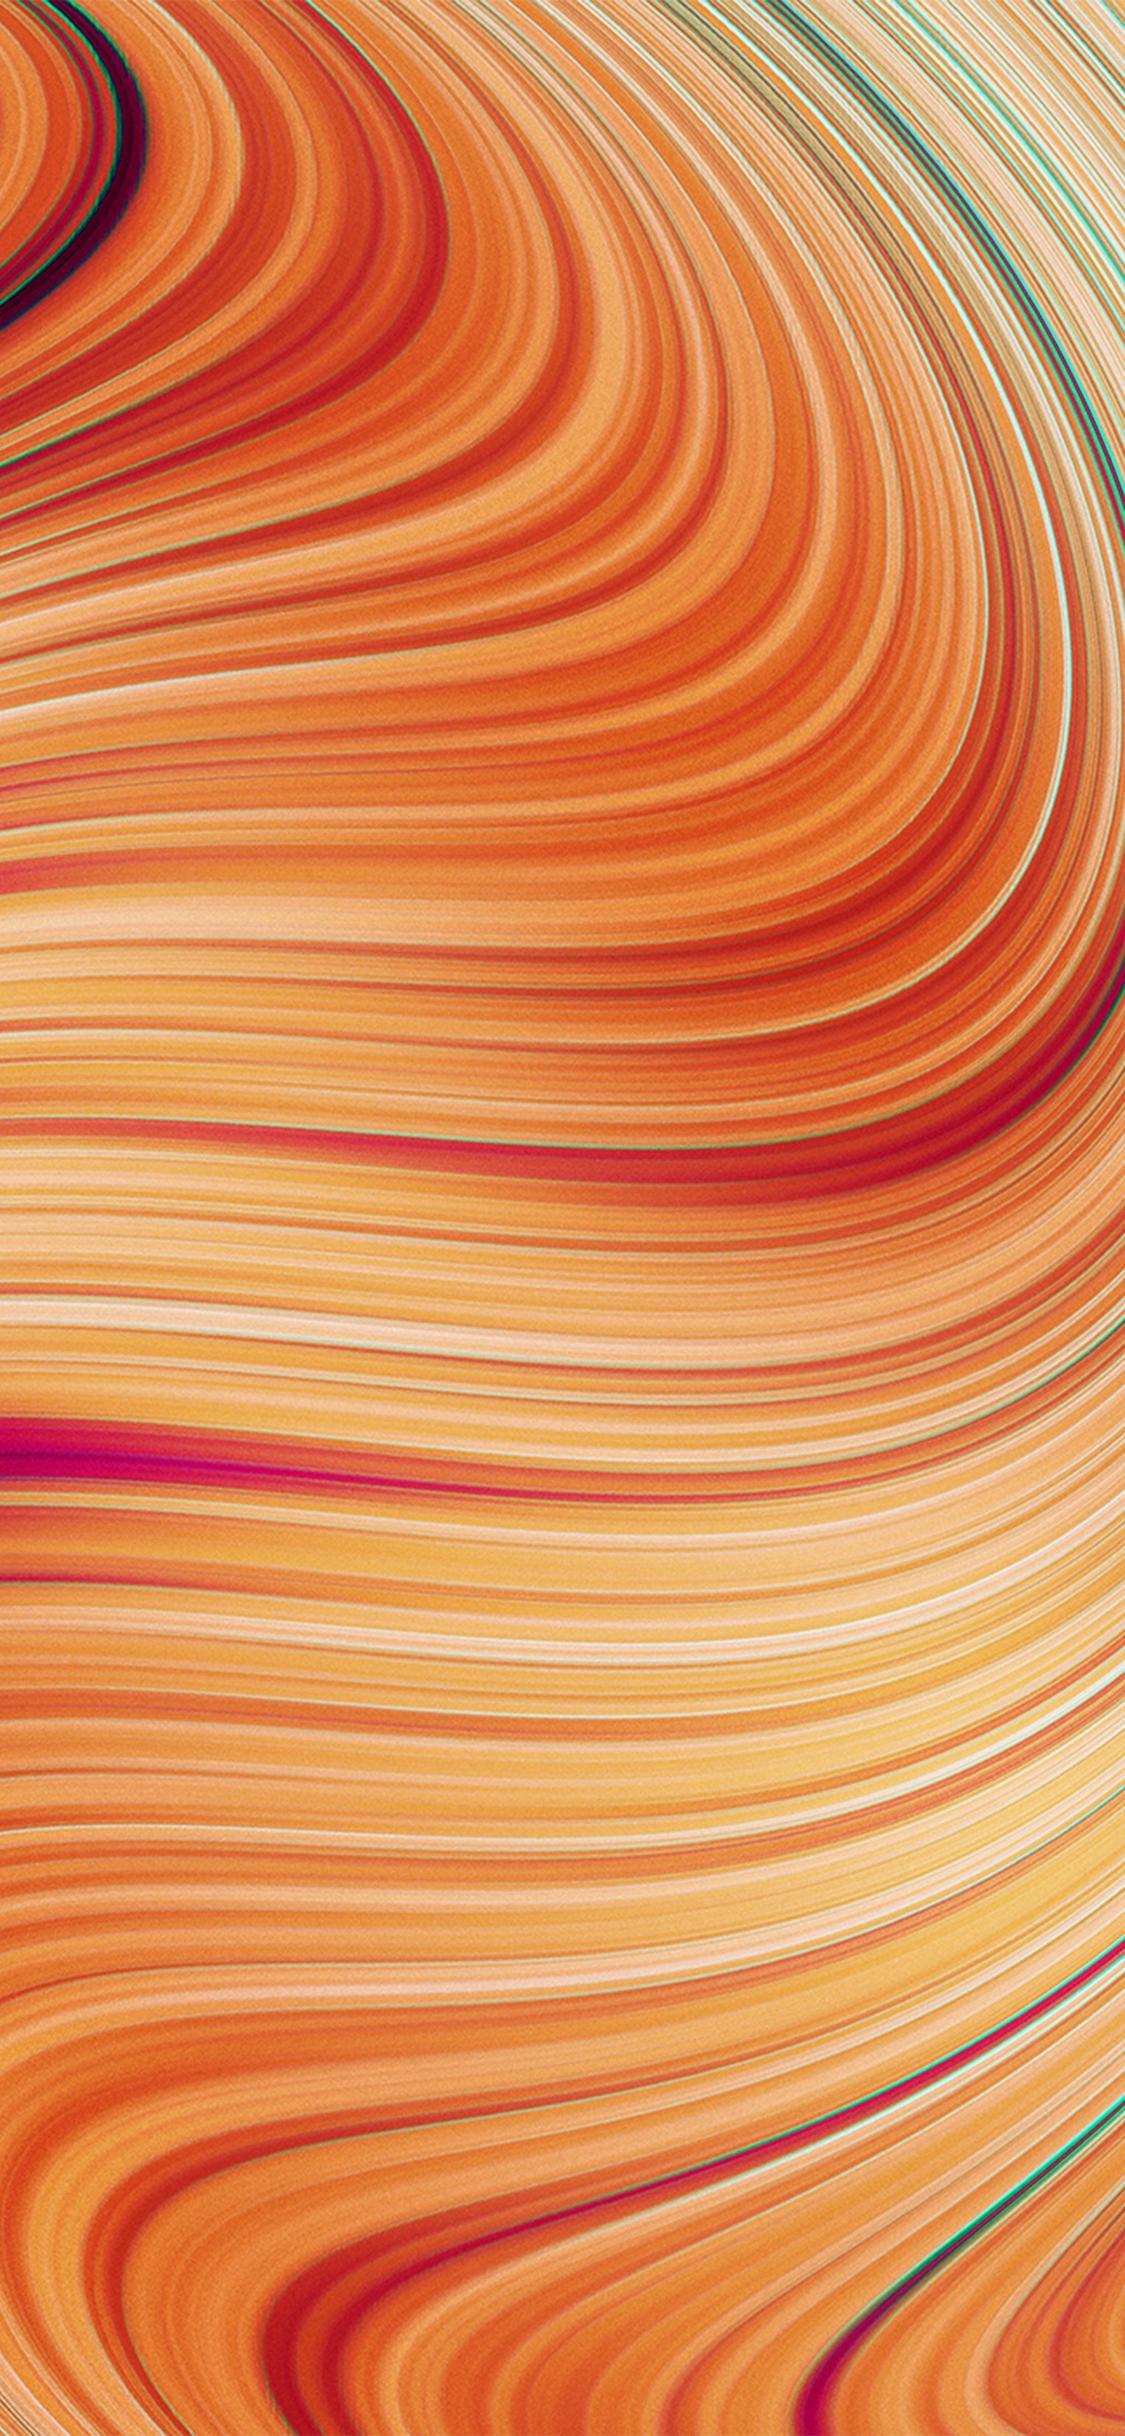 Curve Art Red Pattern Background iPhone X Wallpaper Free